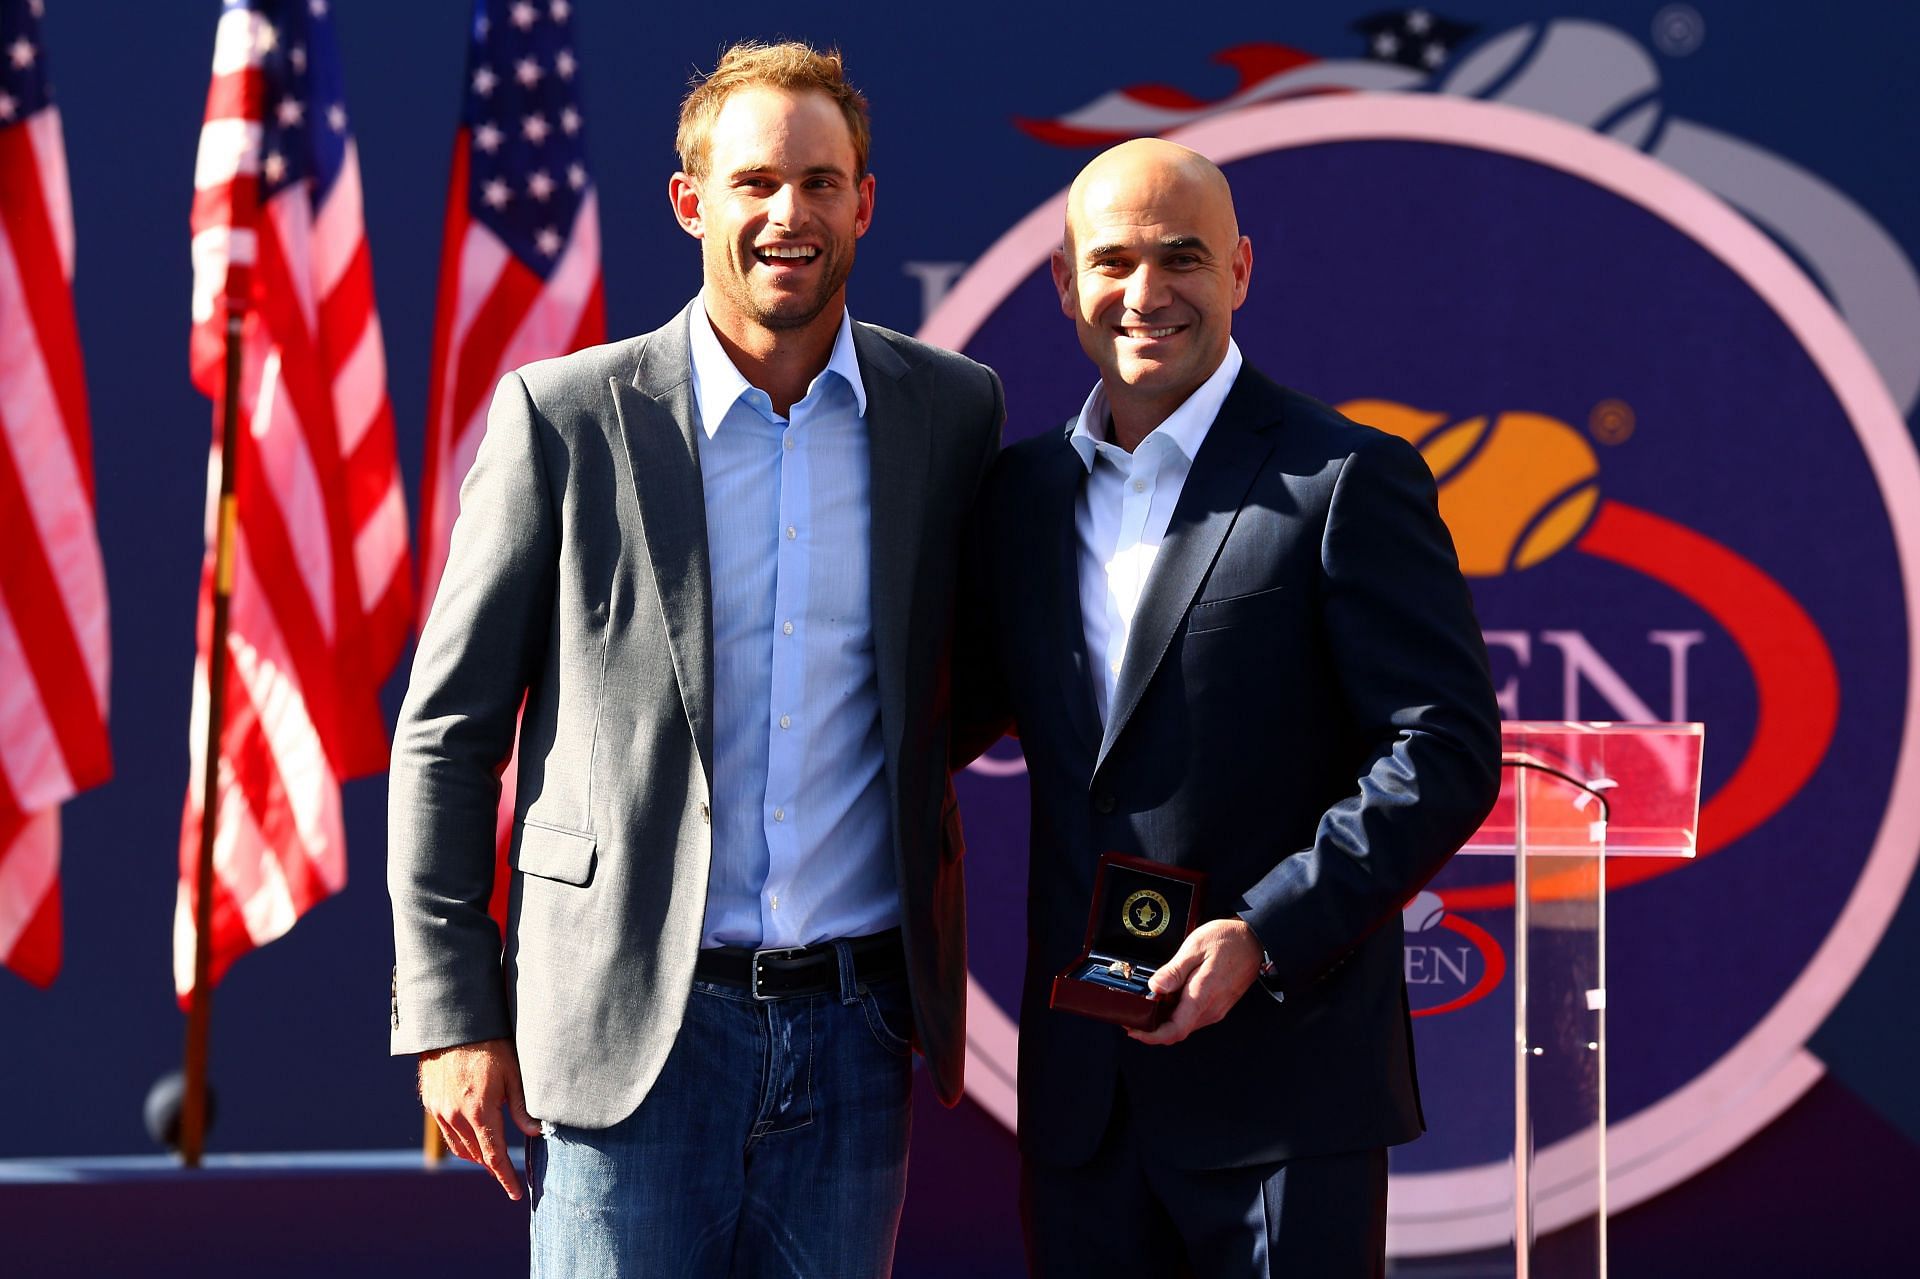 Andy Roddick (left) and Andre Agassi